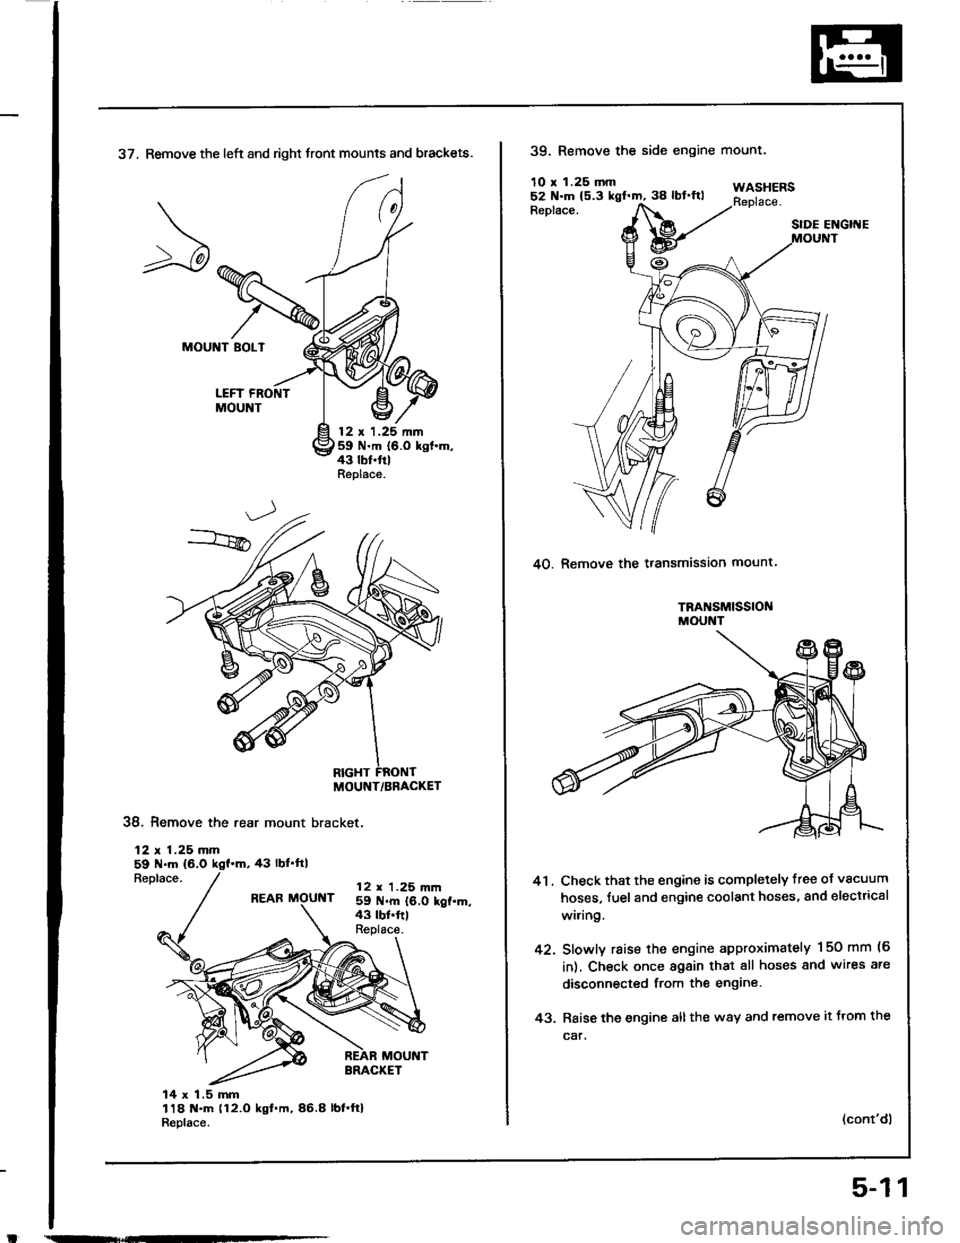 ACURA INTEGRA 1994  Service Repair Manual 37, Remove the left and right front mounts and brackets.
MOUNT BOLT
LEFT FRONTMOUNT
12 t 1.25 nn59 N.m {6.0 kgt.m,43 lbf.trlReplace.
38. Remove the rear mount bracket,
12 r 1.25 mm59 N.m (6.0
Replace.